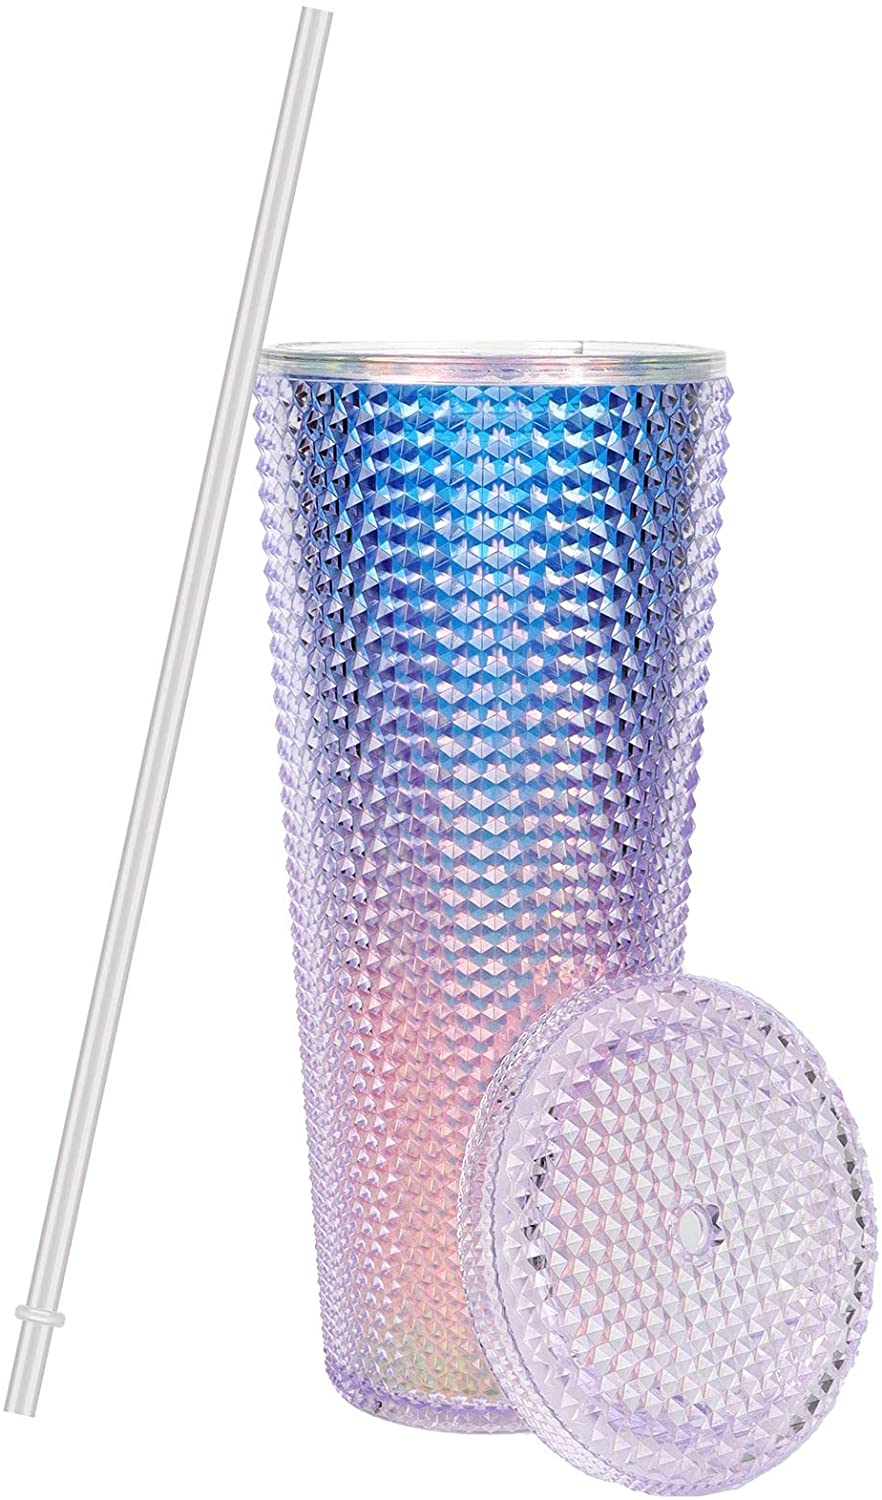 THVALUE 24oz Studded Double Wall Plastic Tumblers with Straw Color Changing Cold Water Cups with Leakproof Lids And Straw Reusable Large Coffee Tumblers